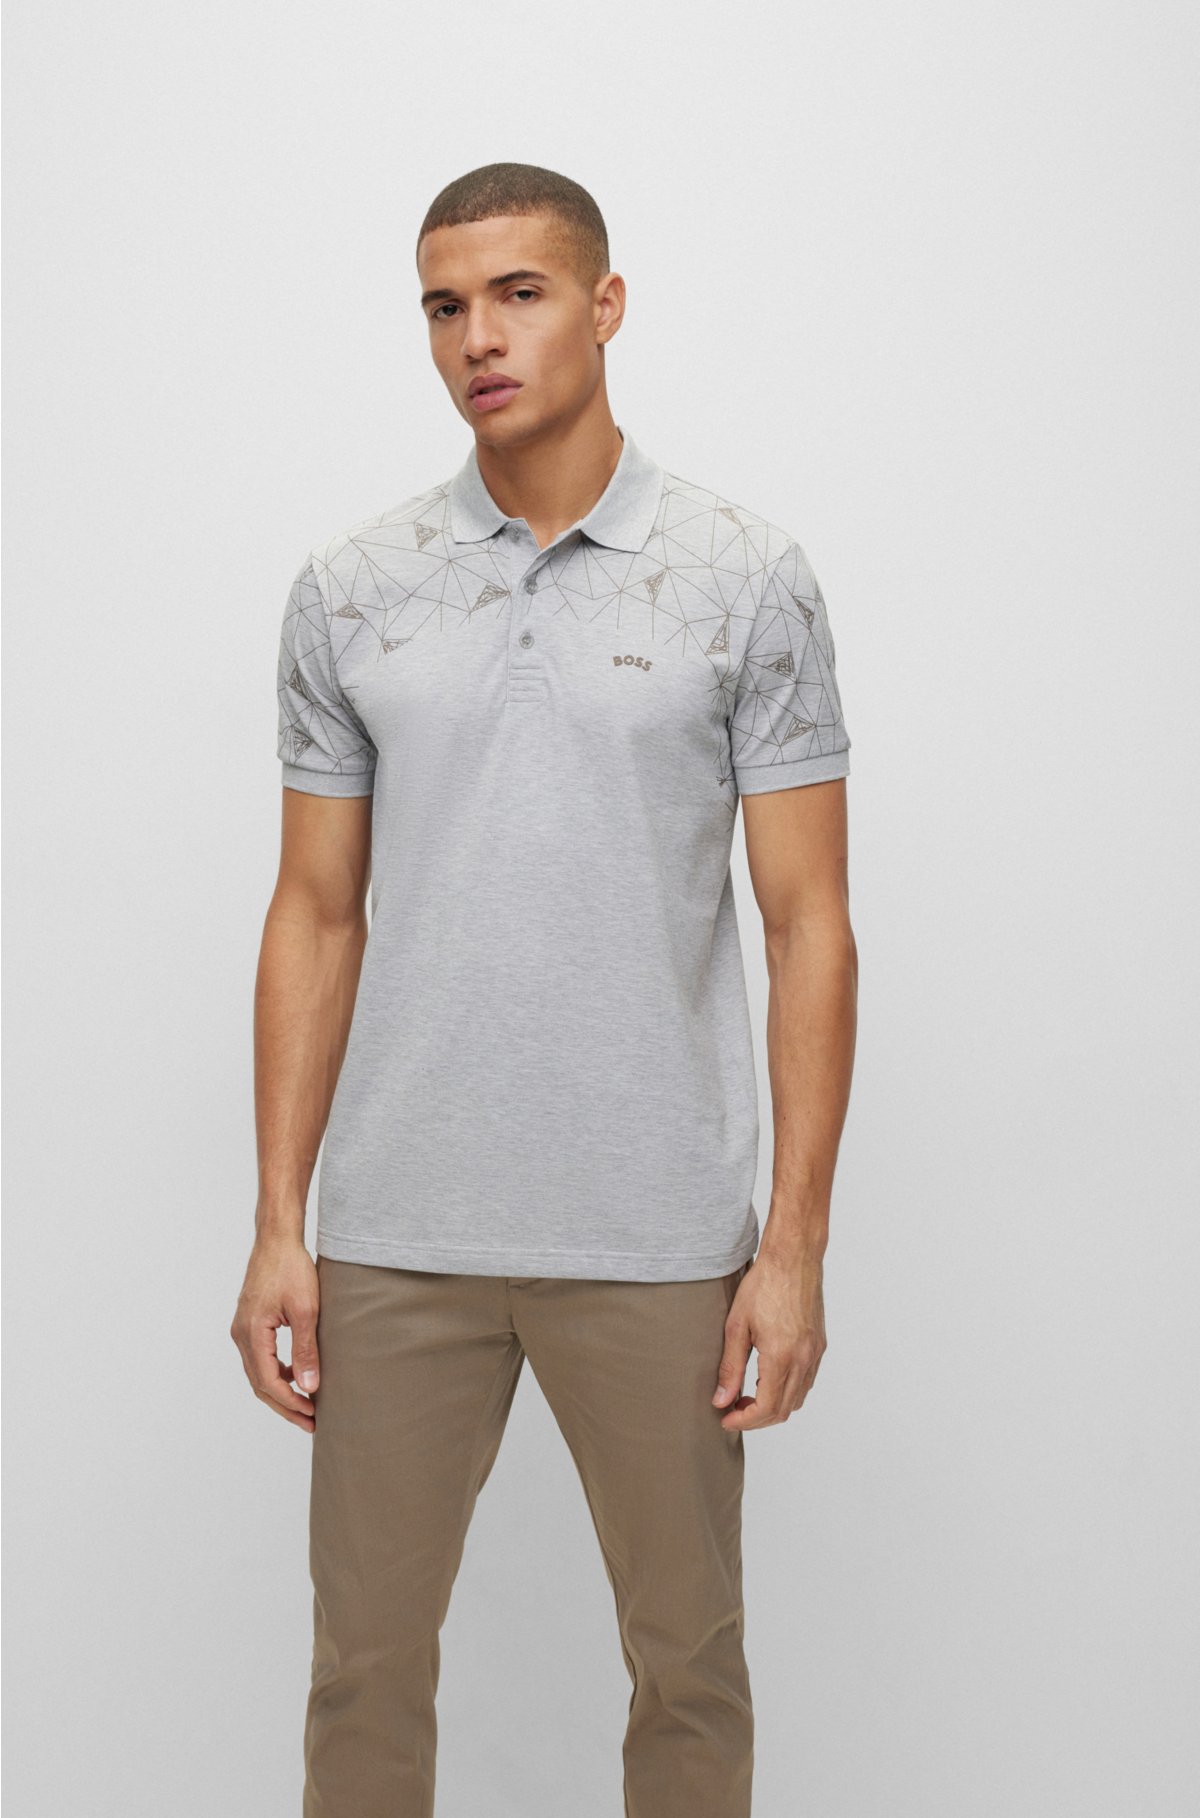 Cotton-blend shirt with slim-fit - grid BOSS polo artwork